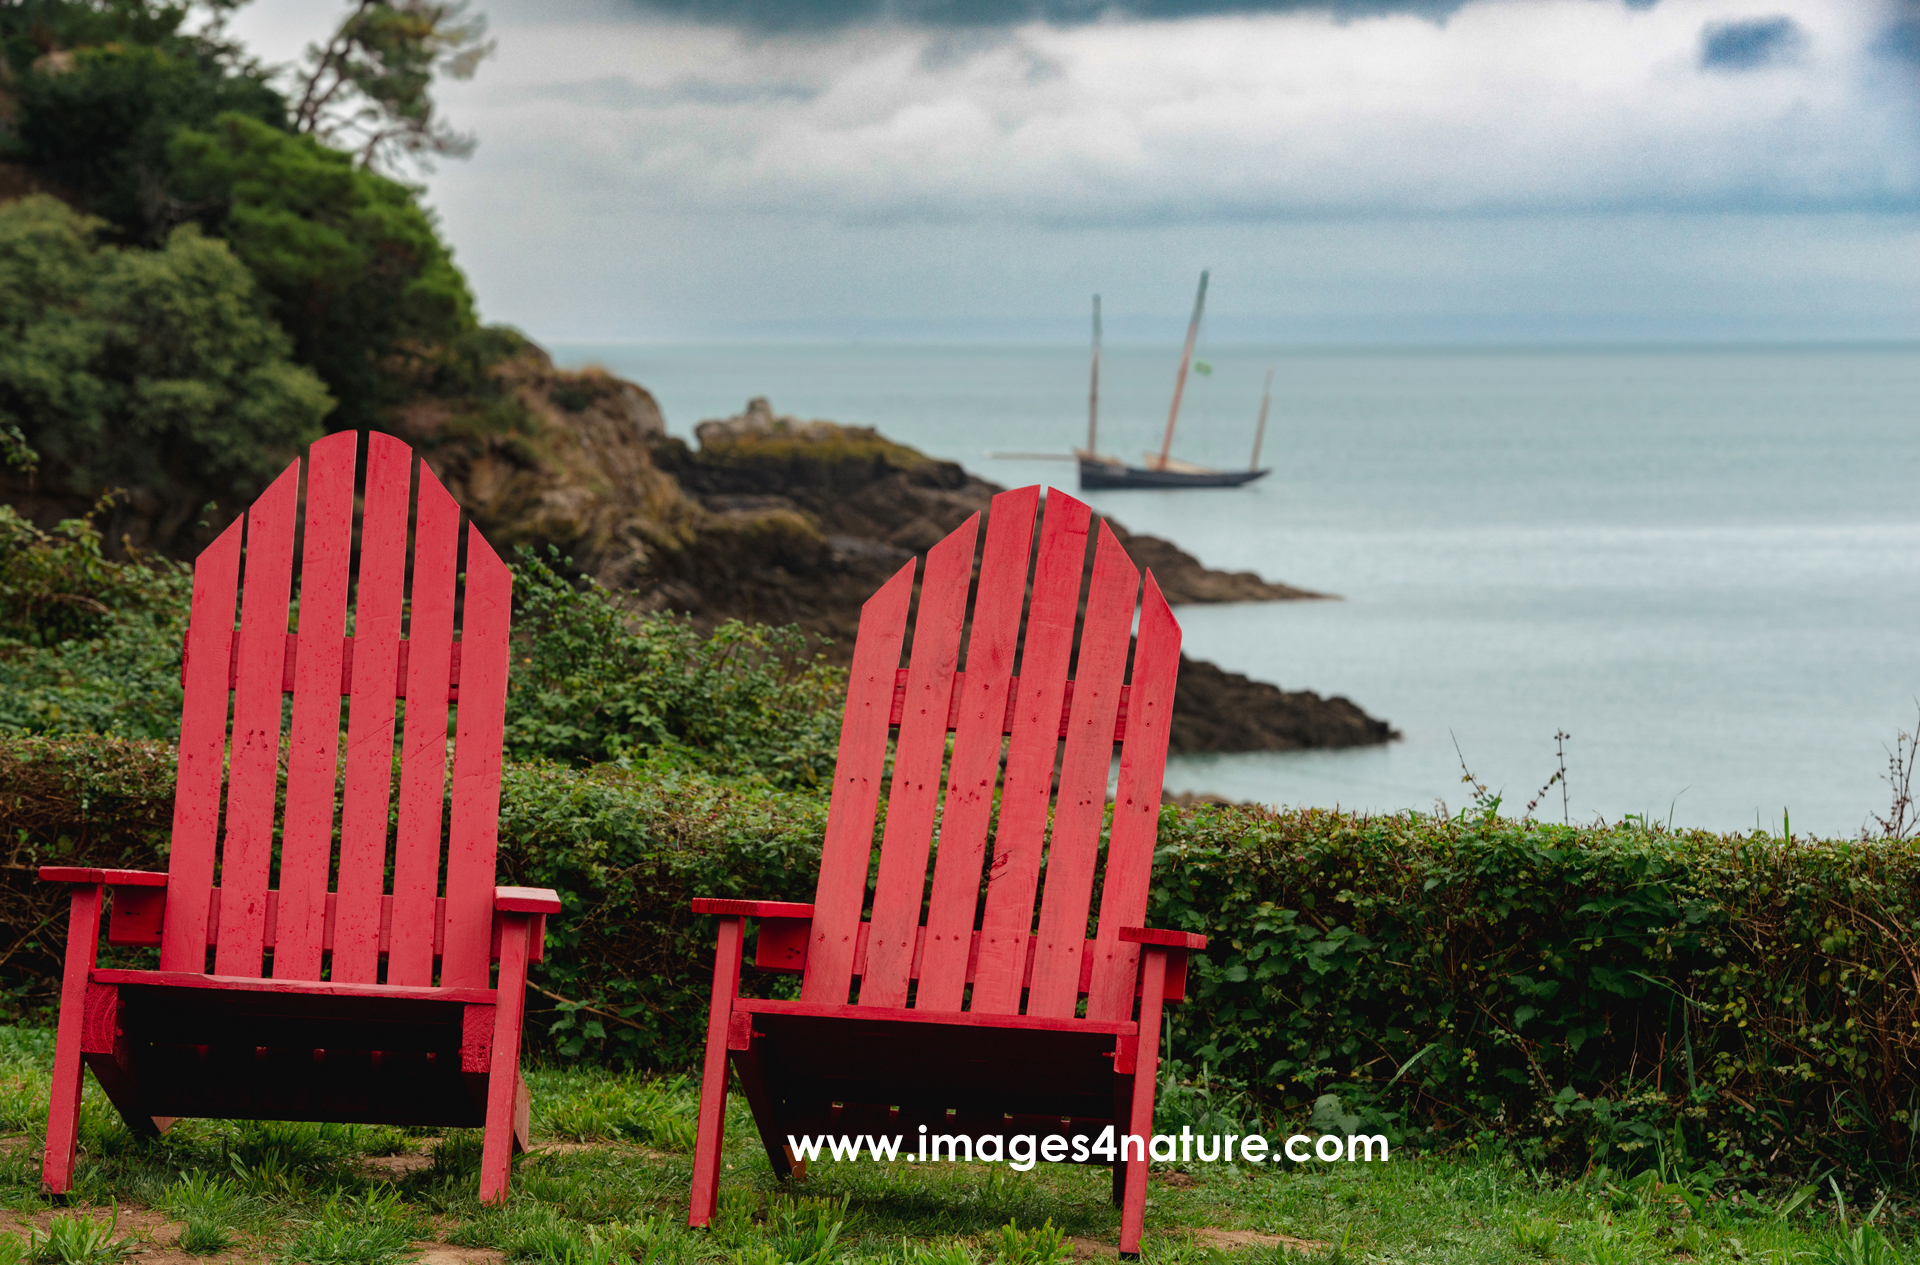 For many, sailing boats maintain a high attraction, and are associated with freedom, adventure and beautiful trips around the world  For this reason, I was happy to get one into this image of the two red deckchairs  I found them in October 2022 in France  Brittany is worth visiting at any season throughout the year  The coastline is quite diverse with breathtaking views overlooking the sea  A beautfiul hiking trail leads from Basse Cancale to Pointe du Grouin  After every corner, interesting surprises and new motives await the curious photographer   France, Basse Cancale, October 2022   Image ID 202210 FR 22